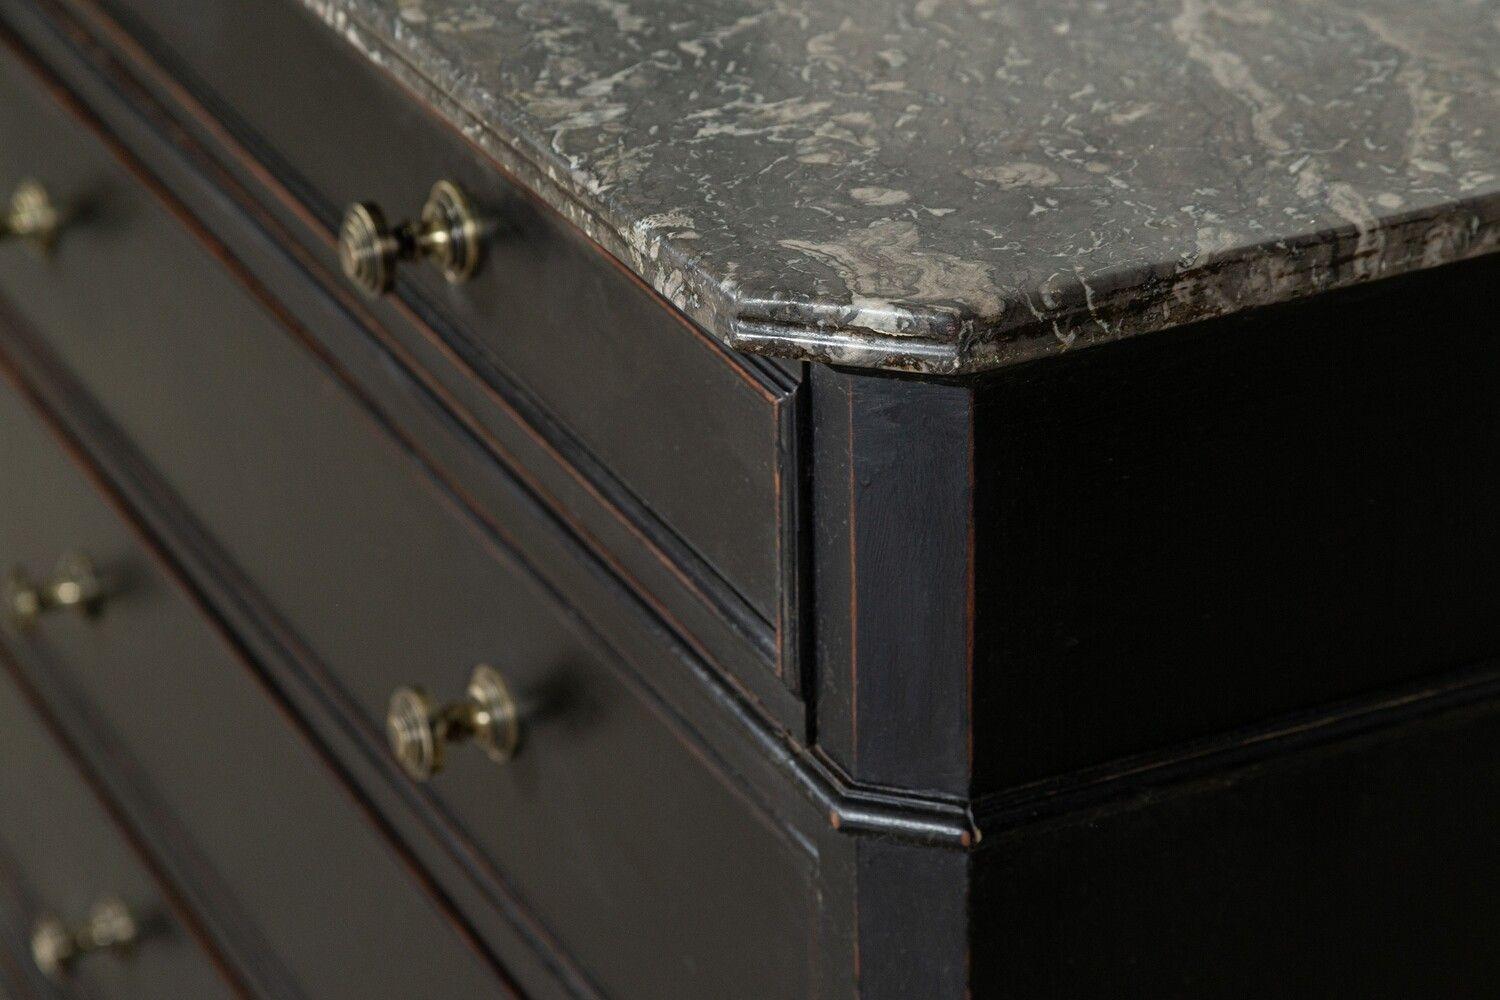 circa 1880
19thC French Ebonised Walnut Commode
(past repaired cracked top)
sku 699
W121 x D56 x H96 cm
Weight 101 Kg